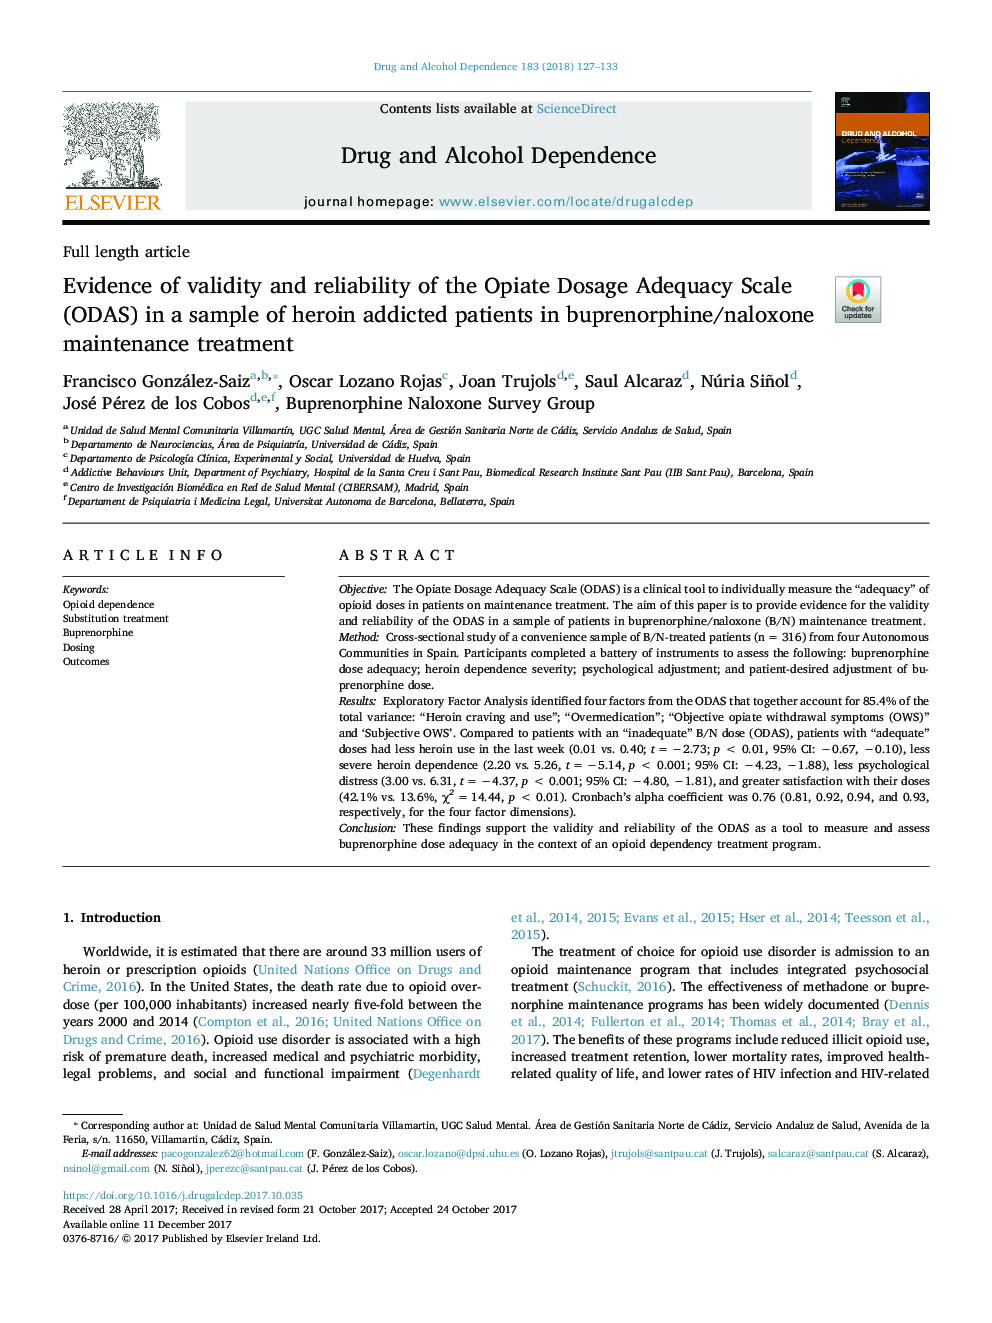 Evidence of validity and reliability of the Opiate Dosage Adequacy Scale (ODAS) in a sample of heroin addicted patients in buprenorphine/naloxone maintenance treatment